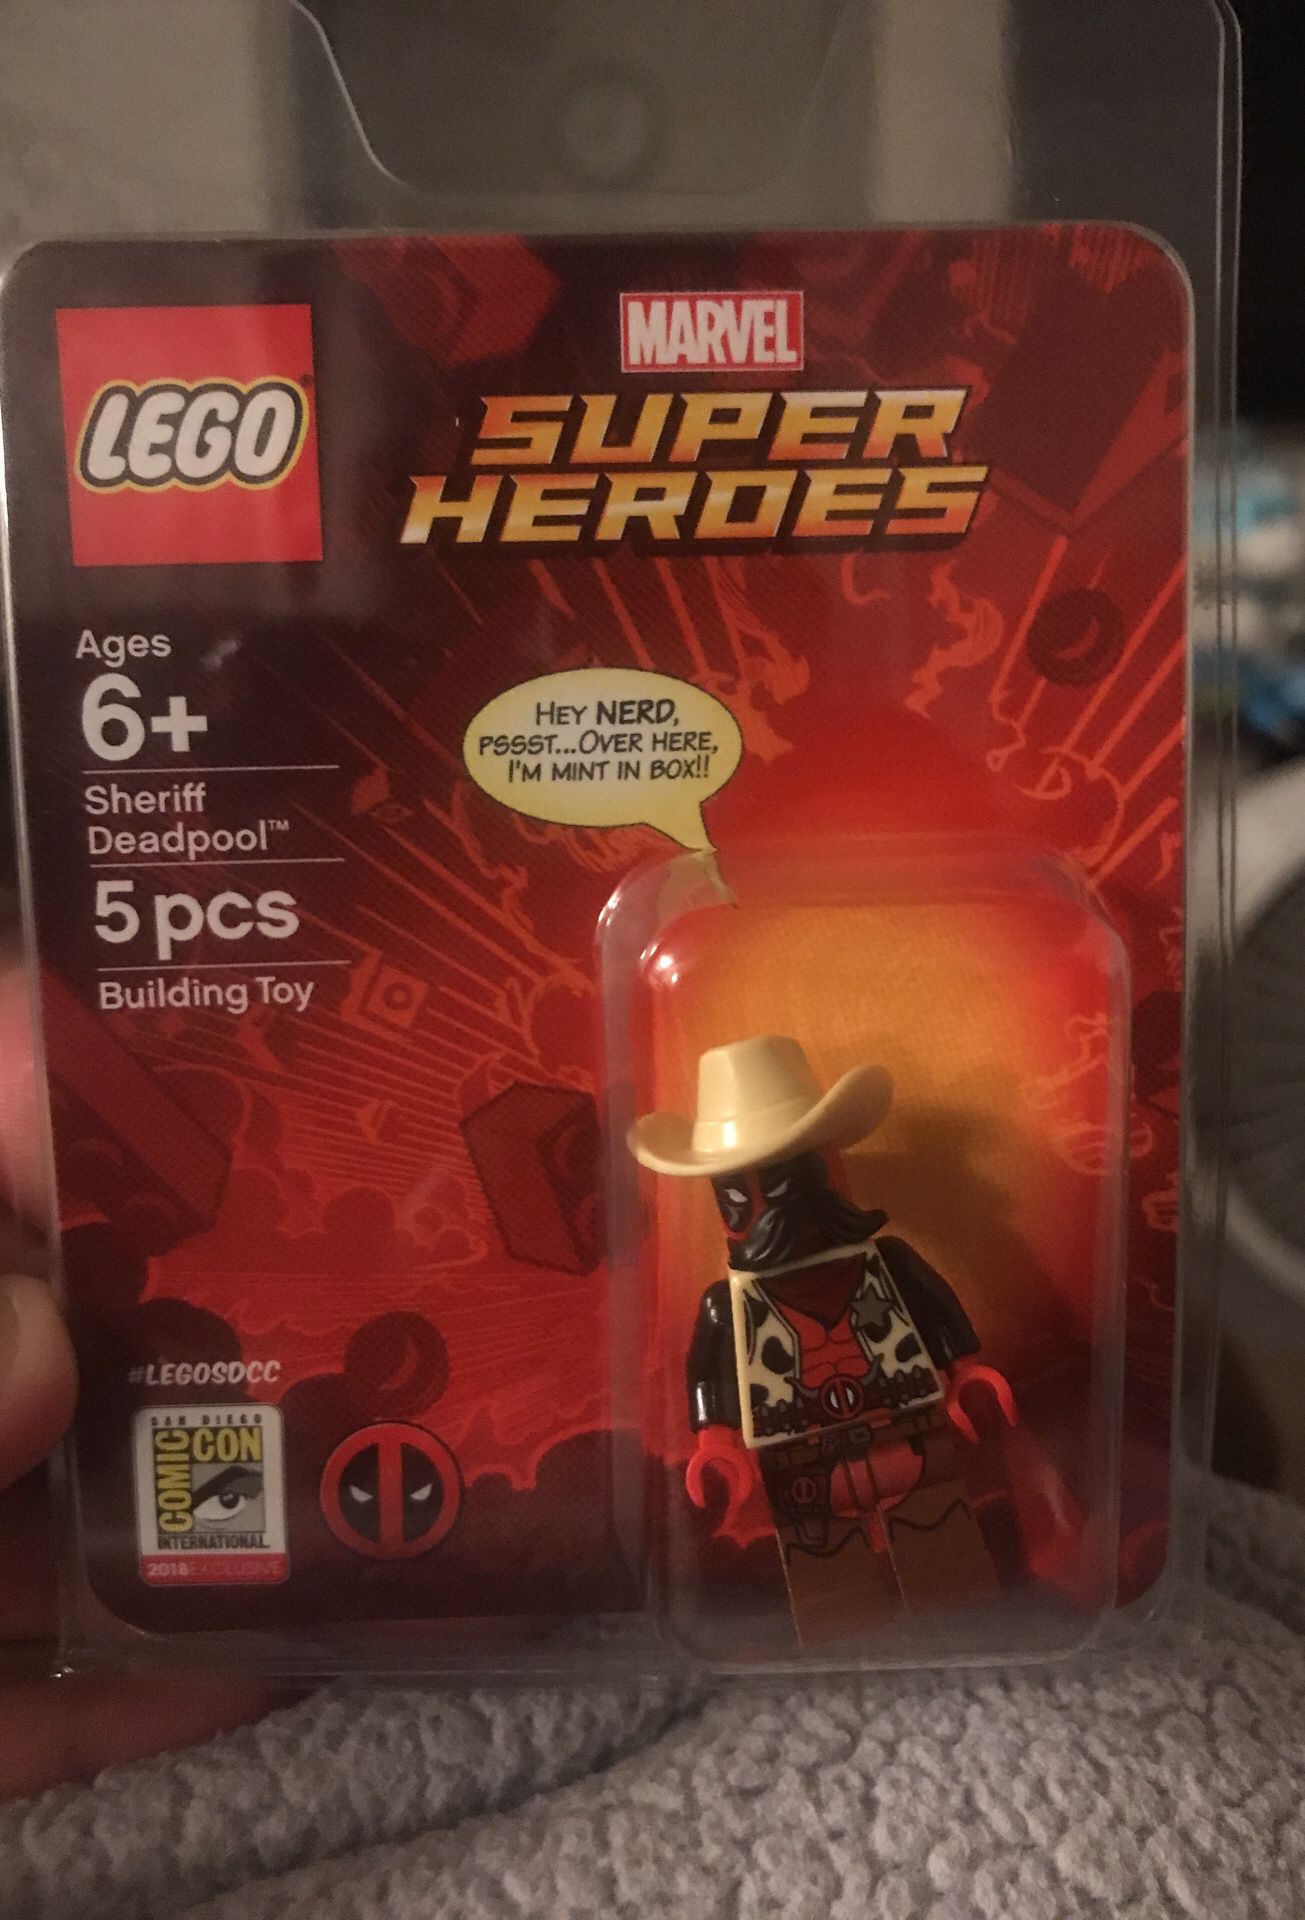 Gylden petroleum At accelerere sheriff Deadpool LEGO Comicon 2018 exclusive for Sale in San Diego, CA -  OfferUp